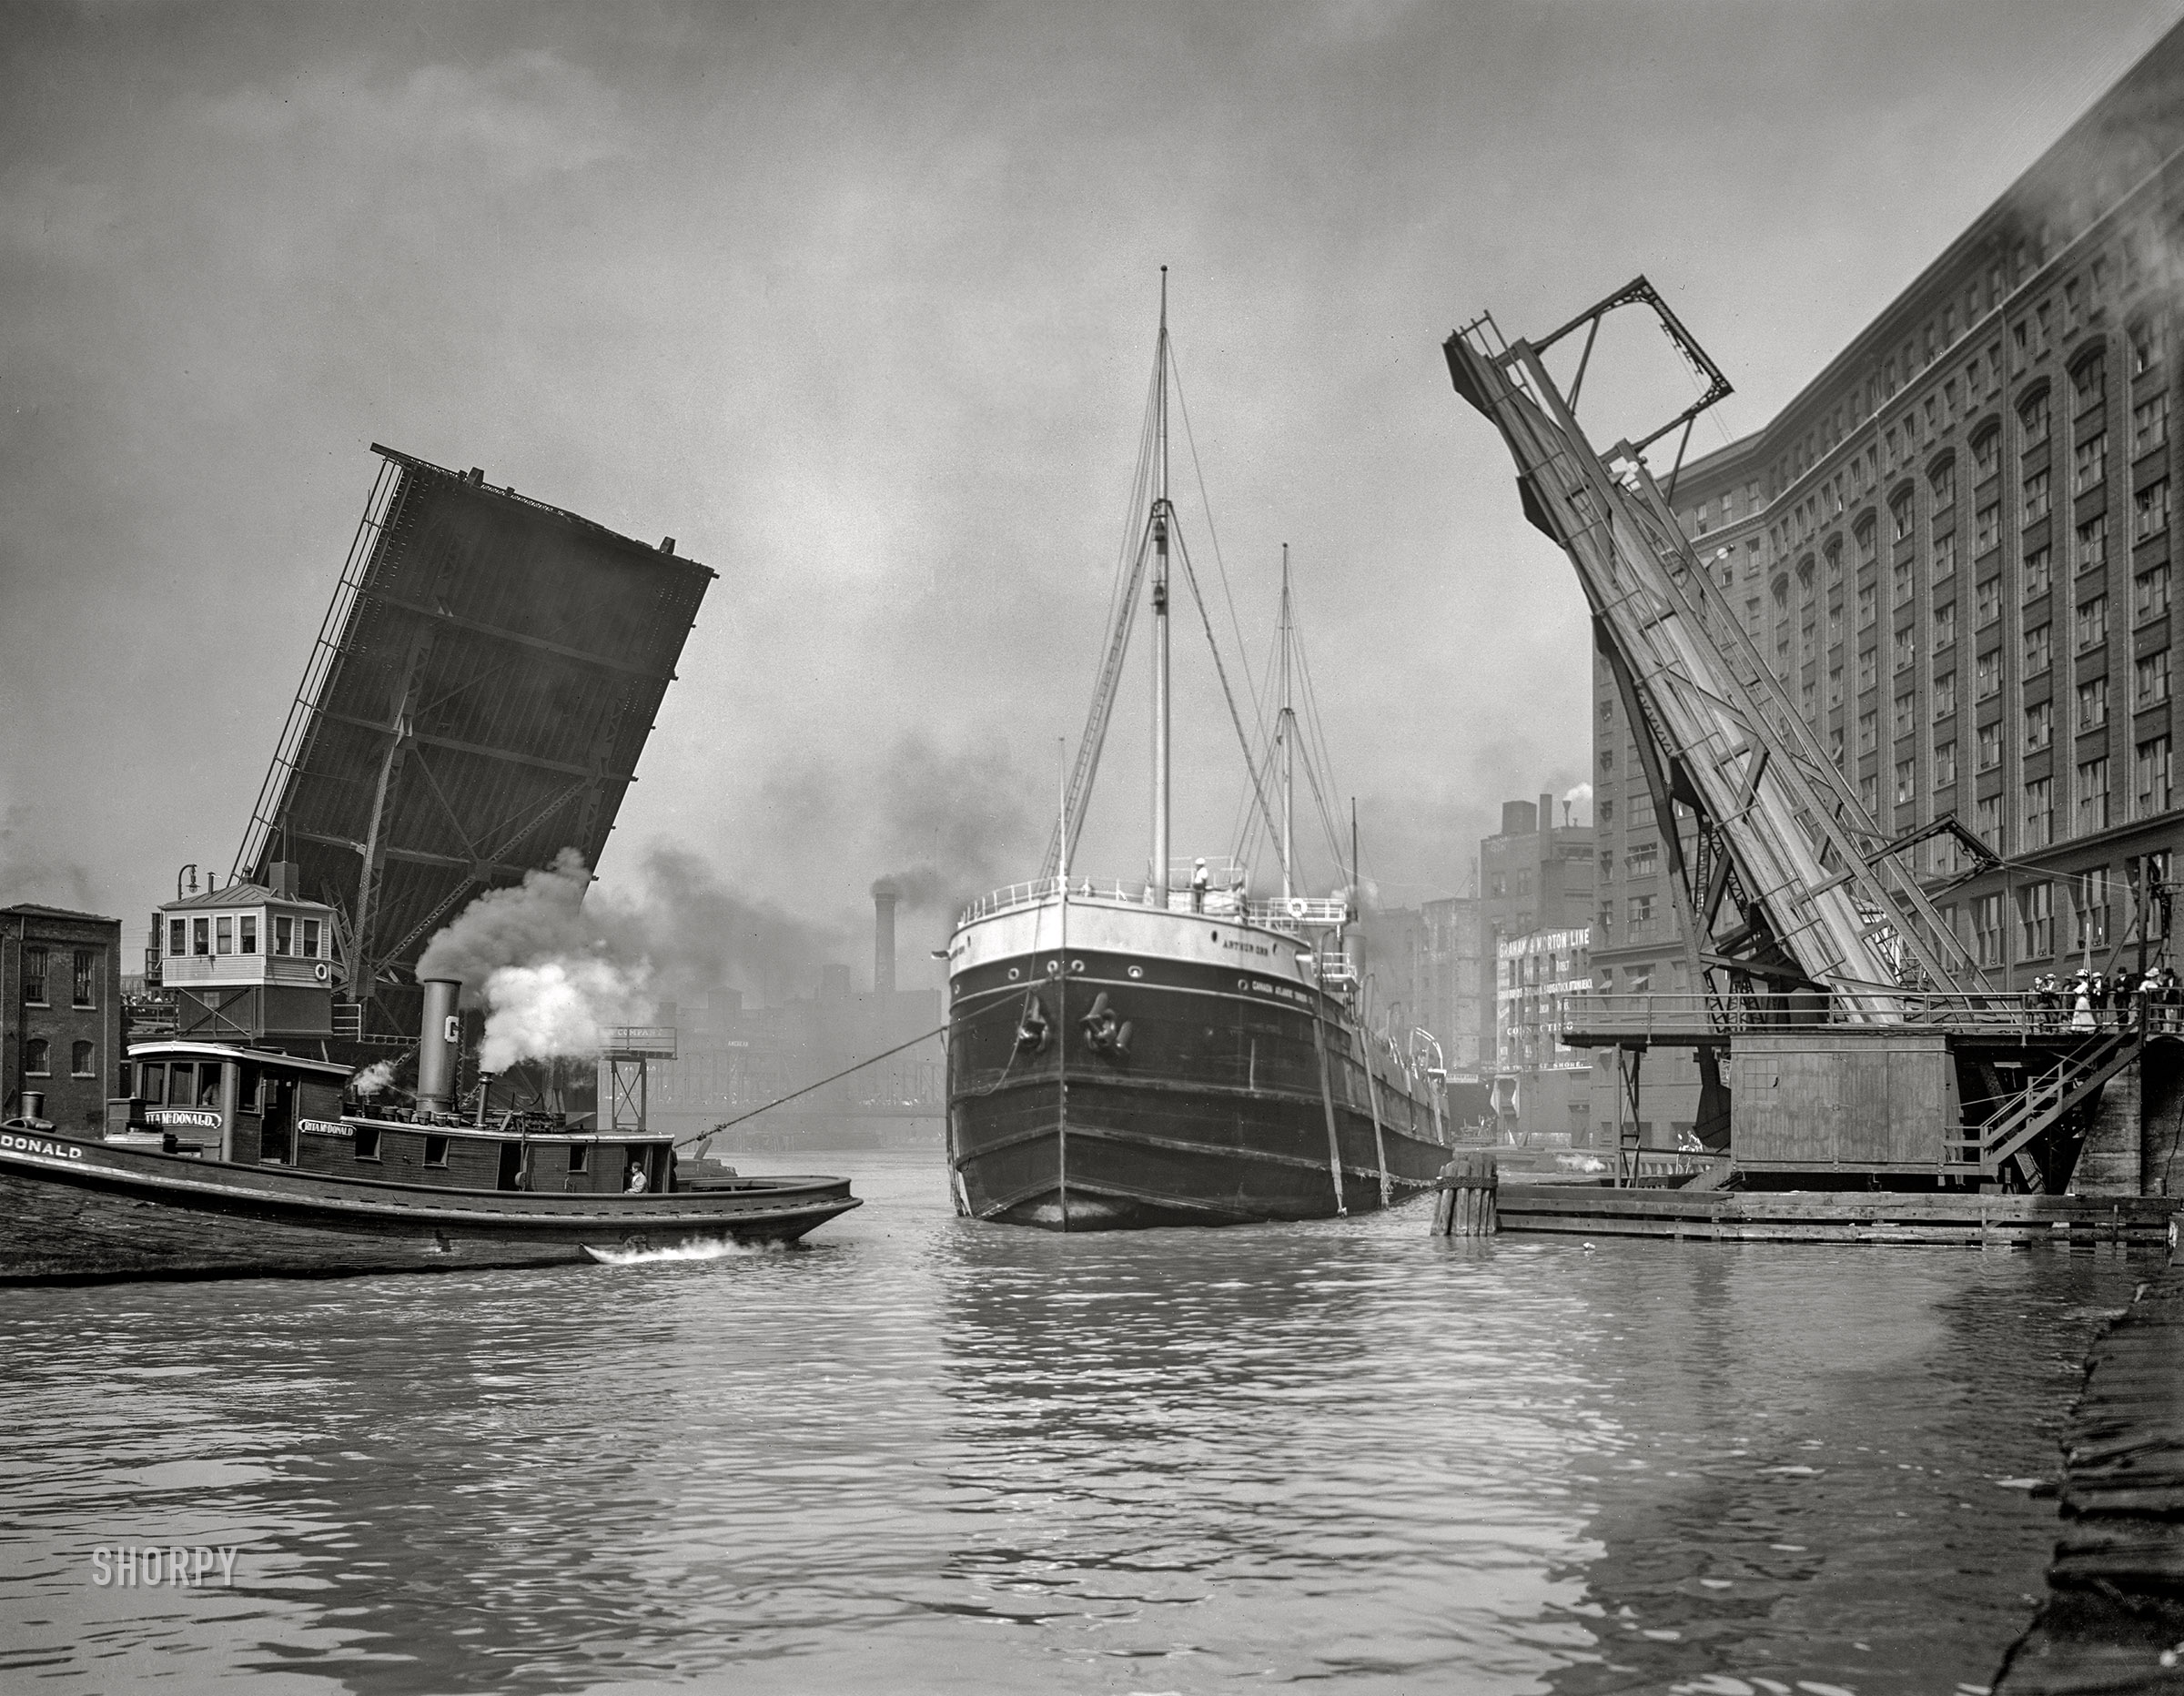 The Chicago River circa 1907. "Canada Atlantic Transit freighter Arthur Orr passing State Street Bridge." 8x10 inch glass negative by Hans Behm, Detroit Publishing Company. View full size.